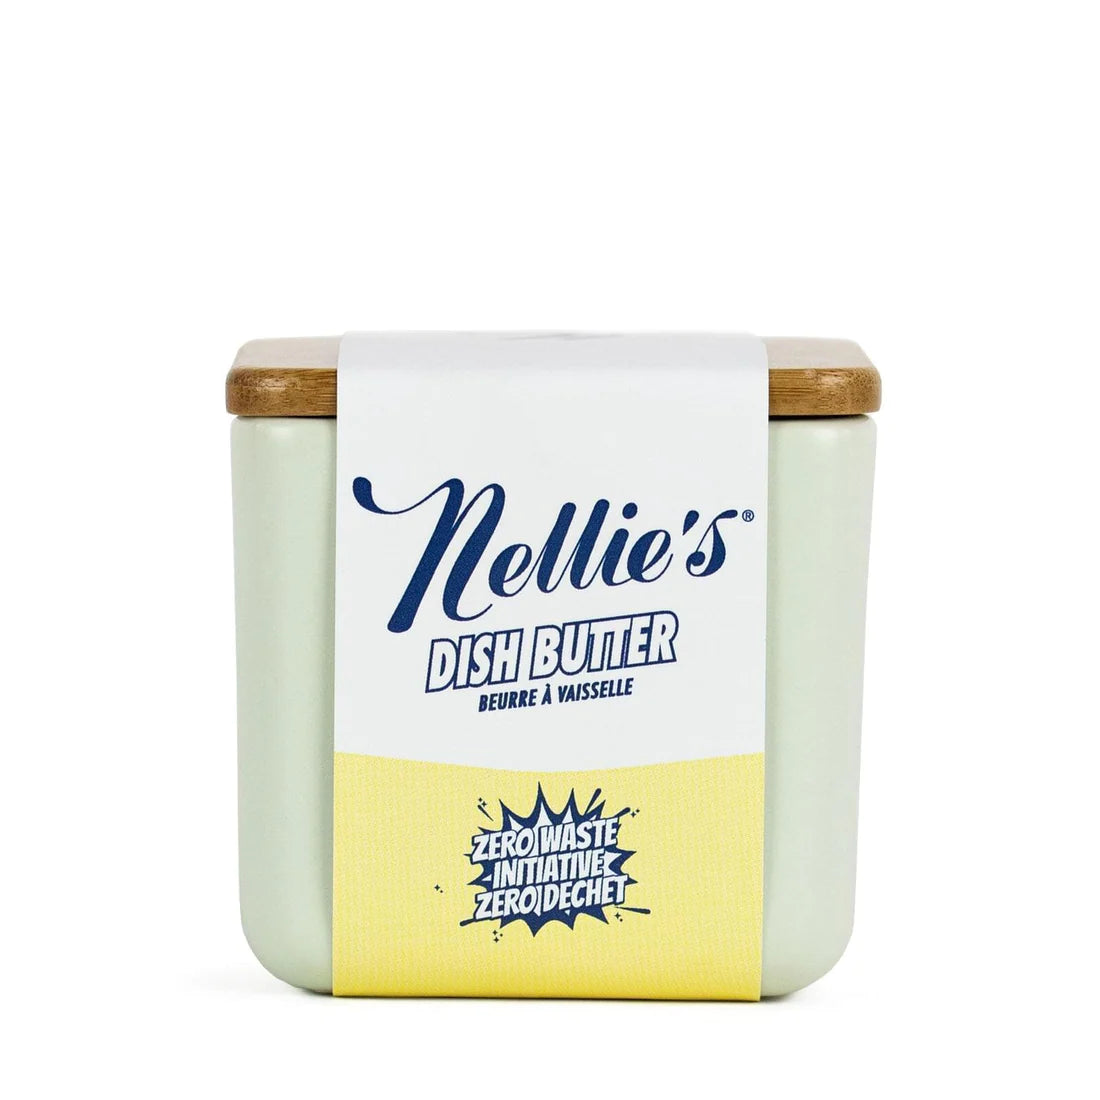 Nellie's, Dish Butter